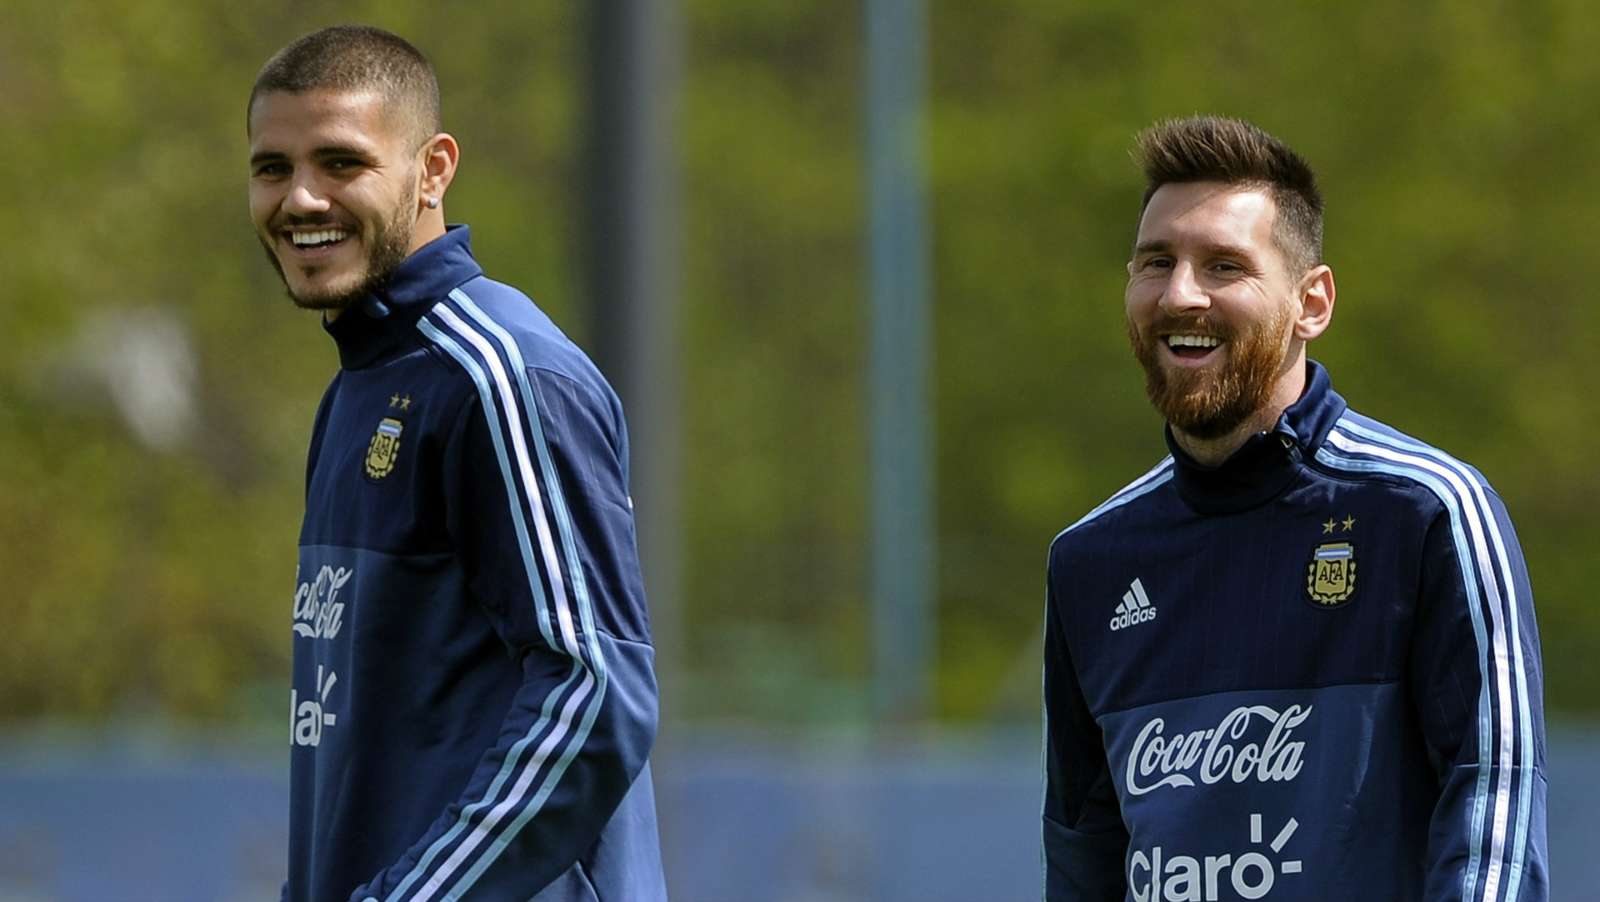 'He is the best player in the world' - Icardi rubbishes claims of rift with Messi - Bóng Đá